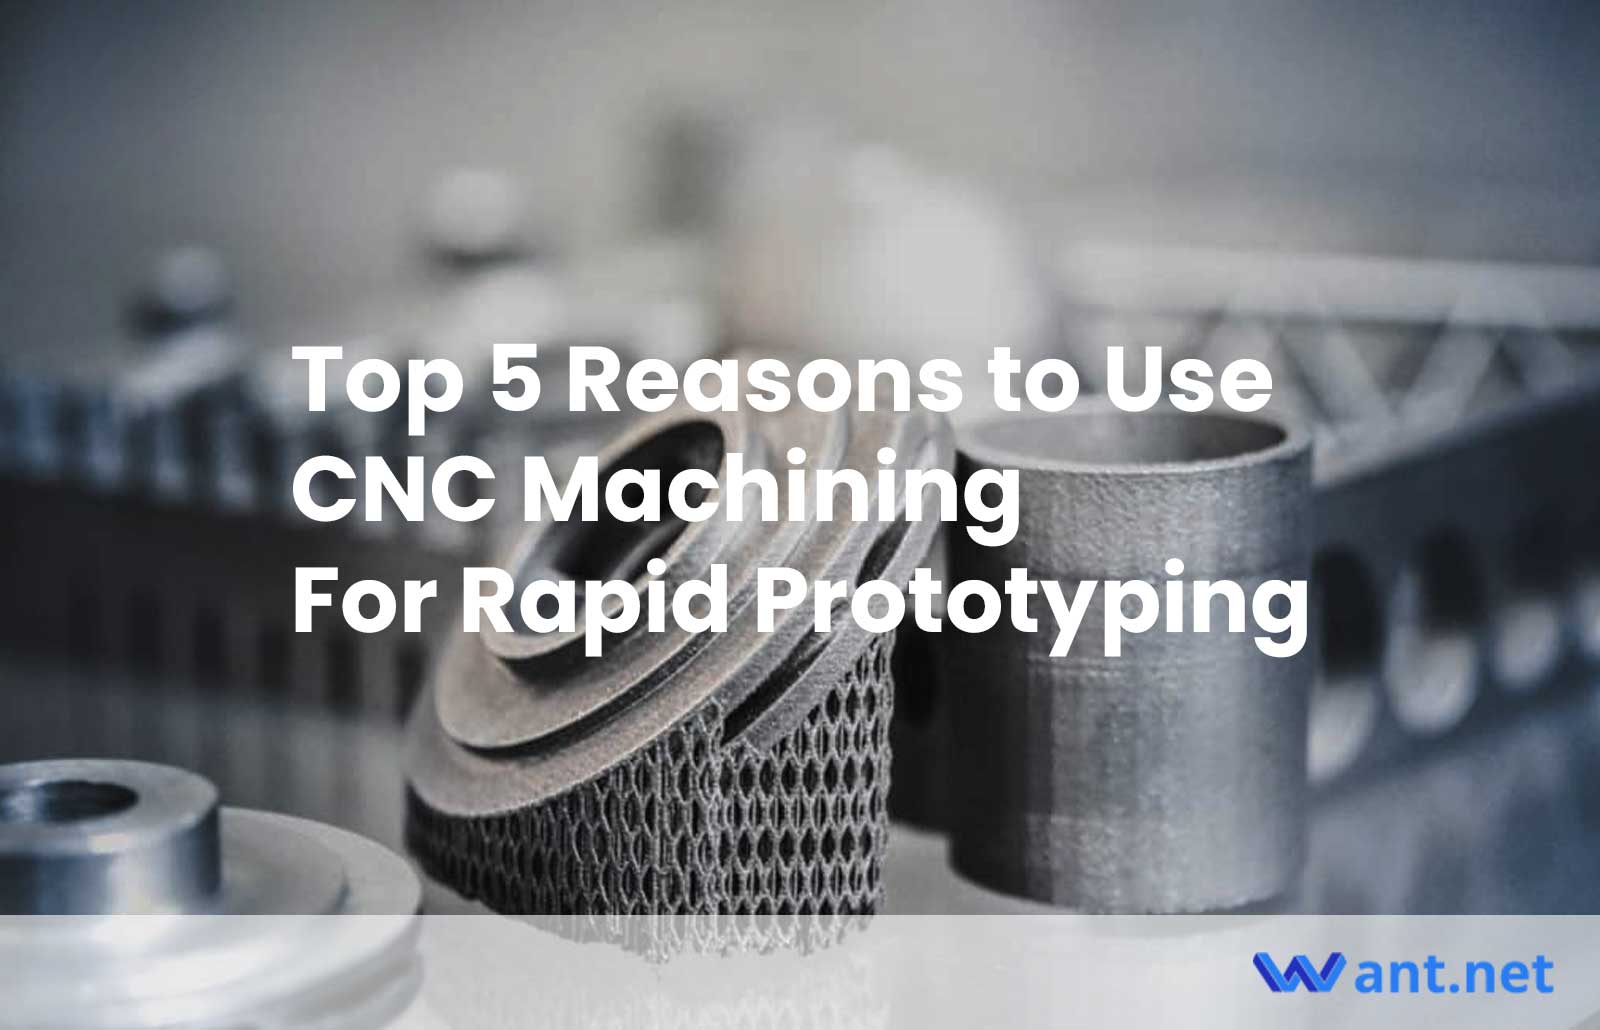 cnc machining for rapid prototyping